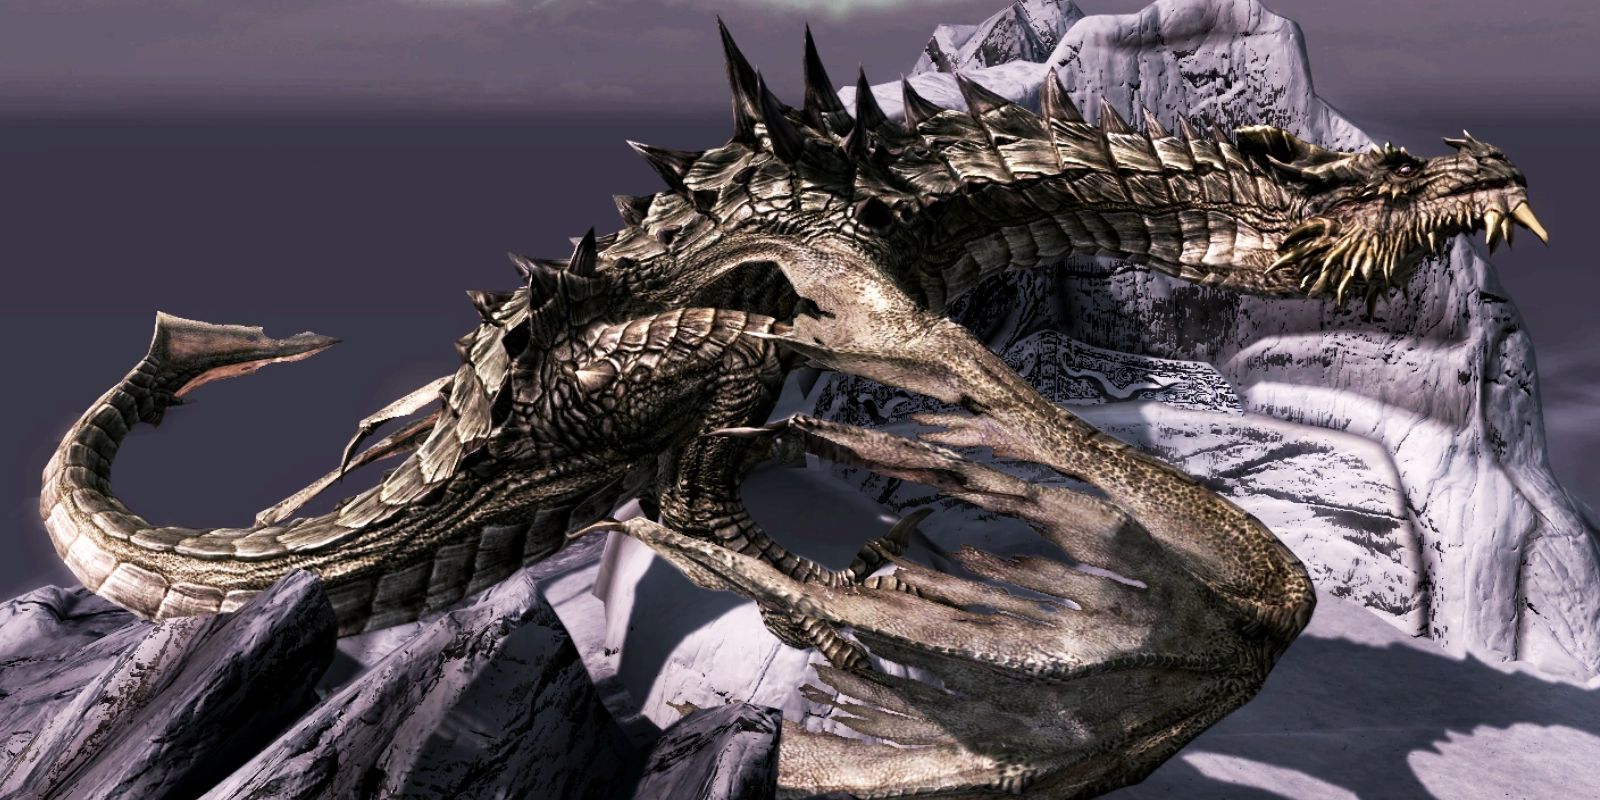 Skyrim's Paarthurnax perches at the Throat of the World.